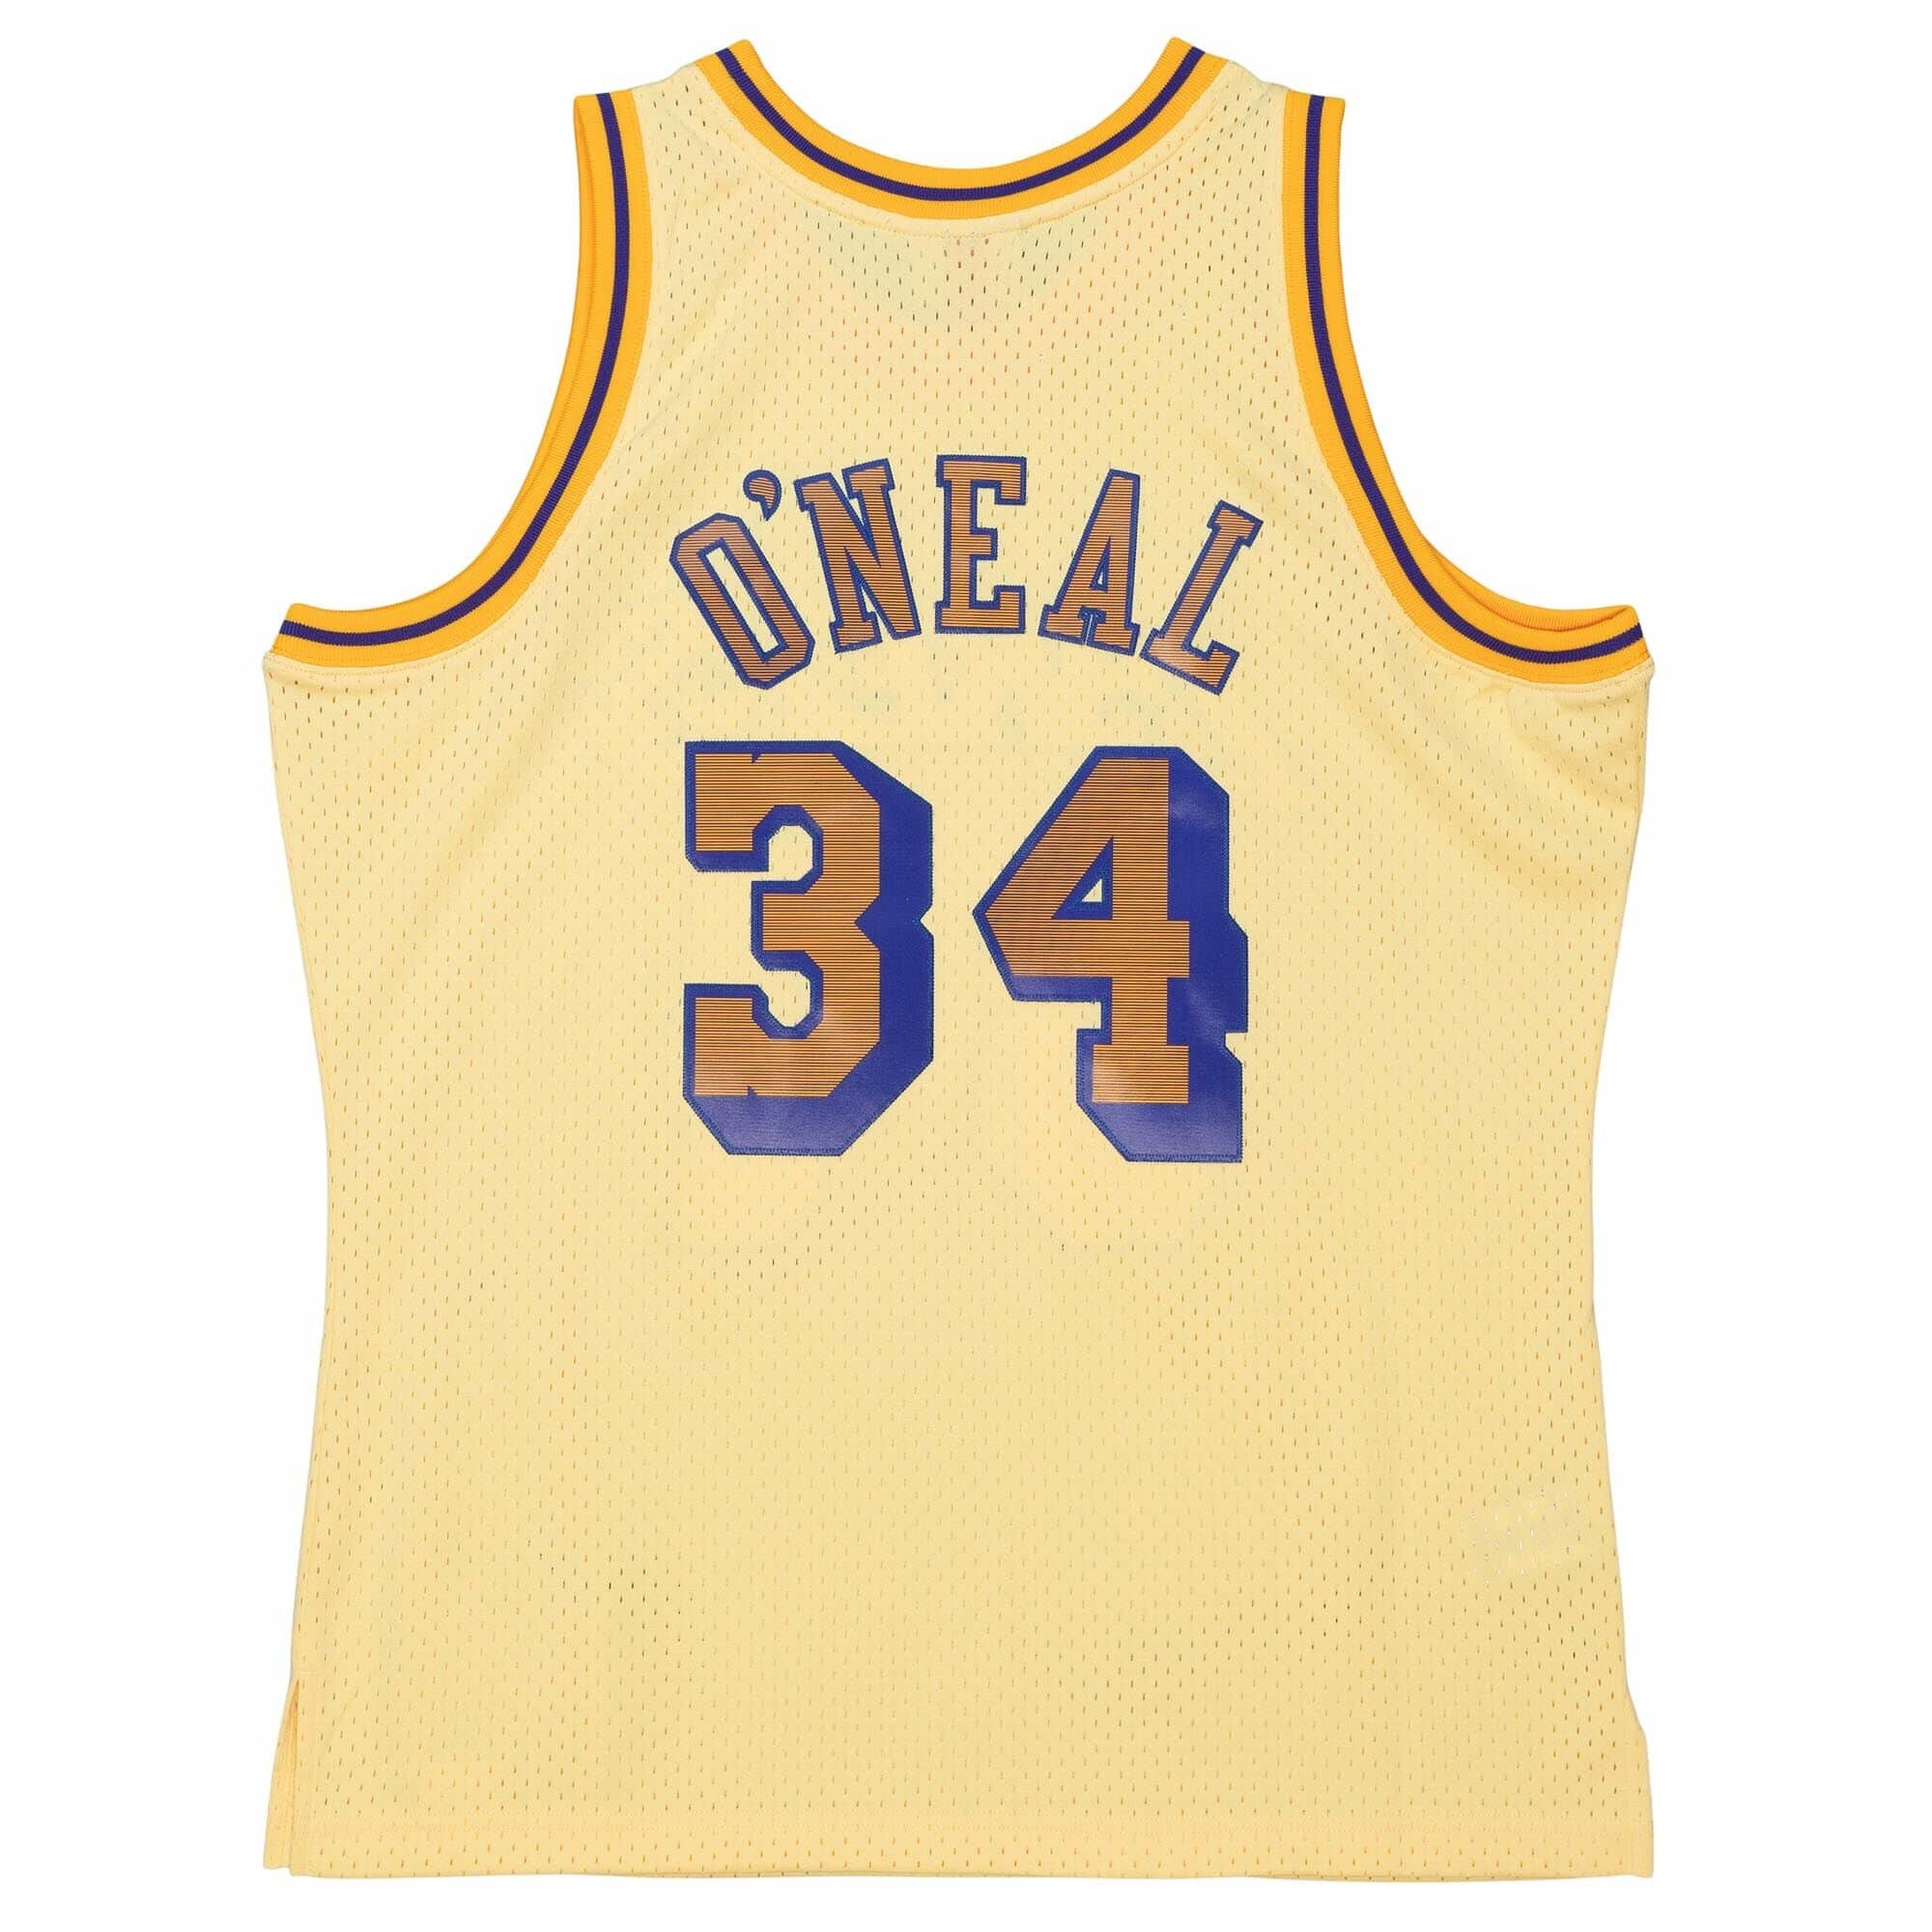 Mitchell and Ness LA Lakers Men's Mitchell & Ness 1996-97 Shaquille O'Neal  #34 Space Knit Swingman Jersey Gold